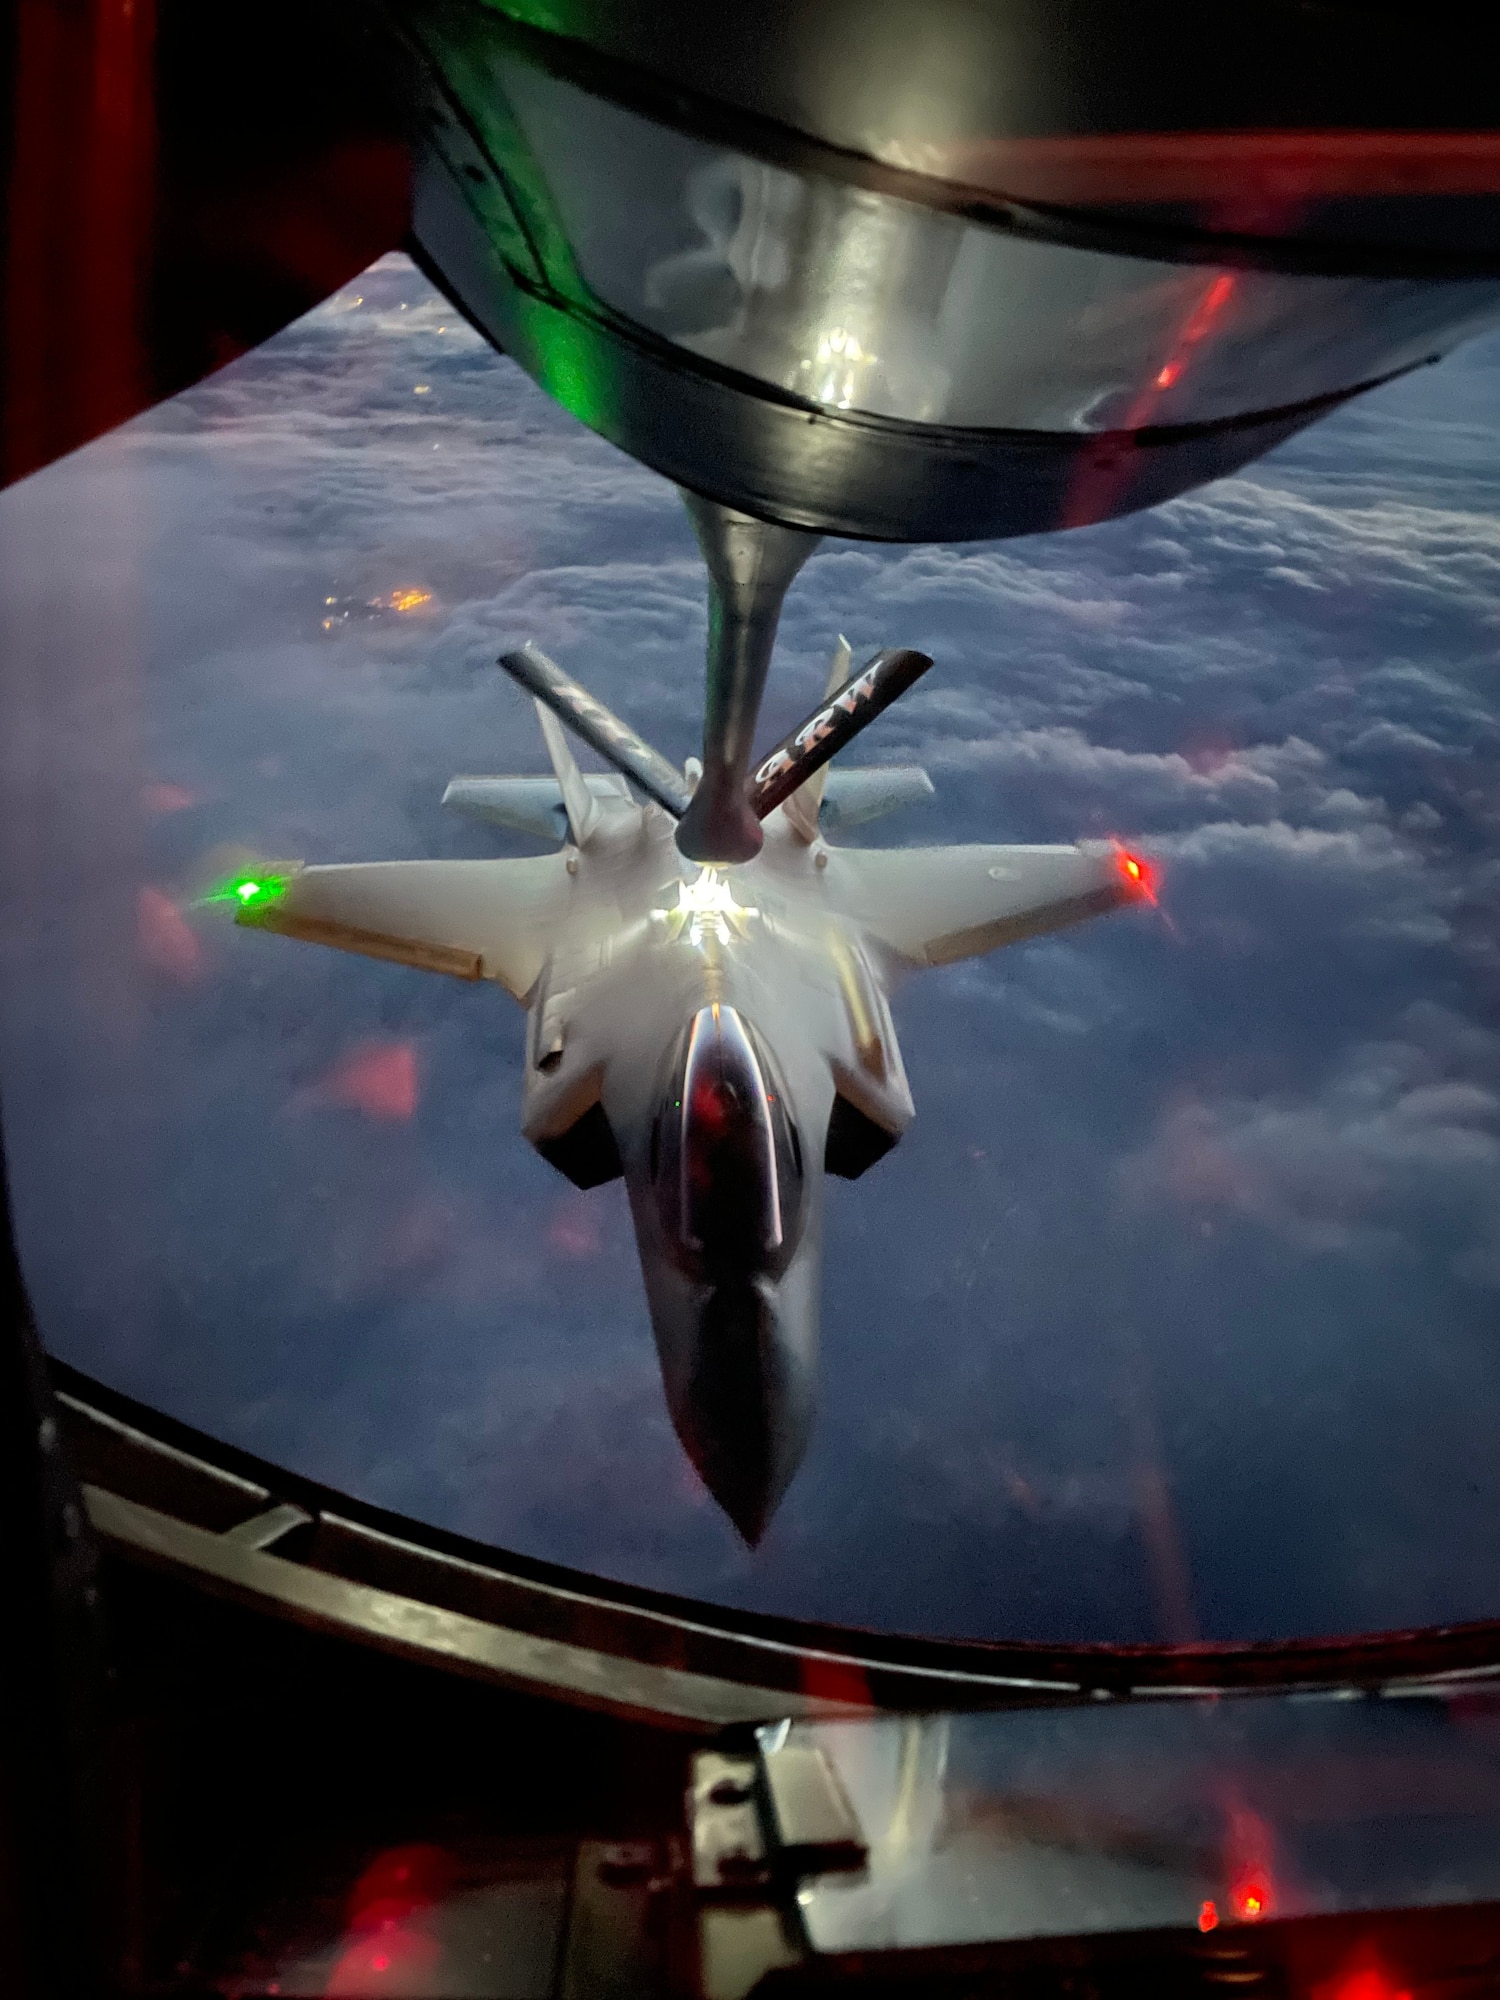 A Norwegian air force F-35A Lighting II aircraft receives fuel from a U.S. Air Force KC-135 Stratotanker aircraft assigned to the 100th Air Refueling Wing, Royal Air Force Mildenhall, England, during exercise Castle Forge over Norway, Nov. 4, 2021. Training with joint and combined allies and partners increases lethality and enhances interoperability, allowing U.S. forces to counter military aggression and coercion by sharing responsibilities for common defense. In addition to F-15 Eagle aircraft operations in the Black Sea Region, Castle Forge encompasses the USAFE-wide Agile Combat Employment capstone event. Castle Forge’s components will better enable forces to quickly disperse and continue to deliver air power from locations with varying levels of capacity and support, ensuring Airmen are always ready to respond to potential threats. (U.S. Air Force photo by Senior Airman Joseph Barron)